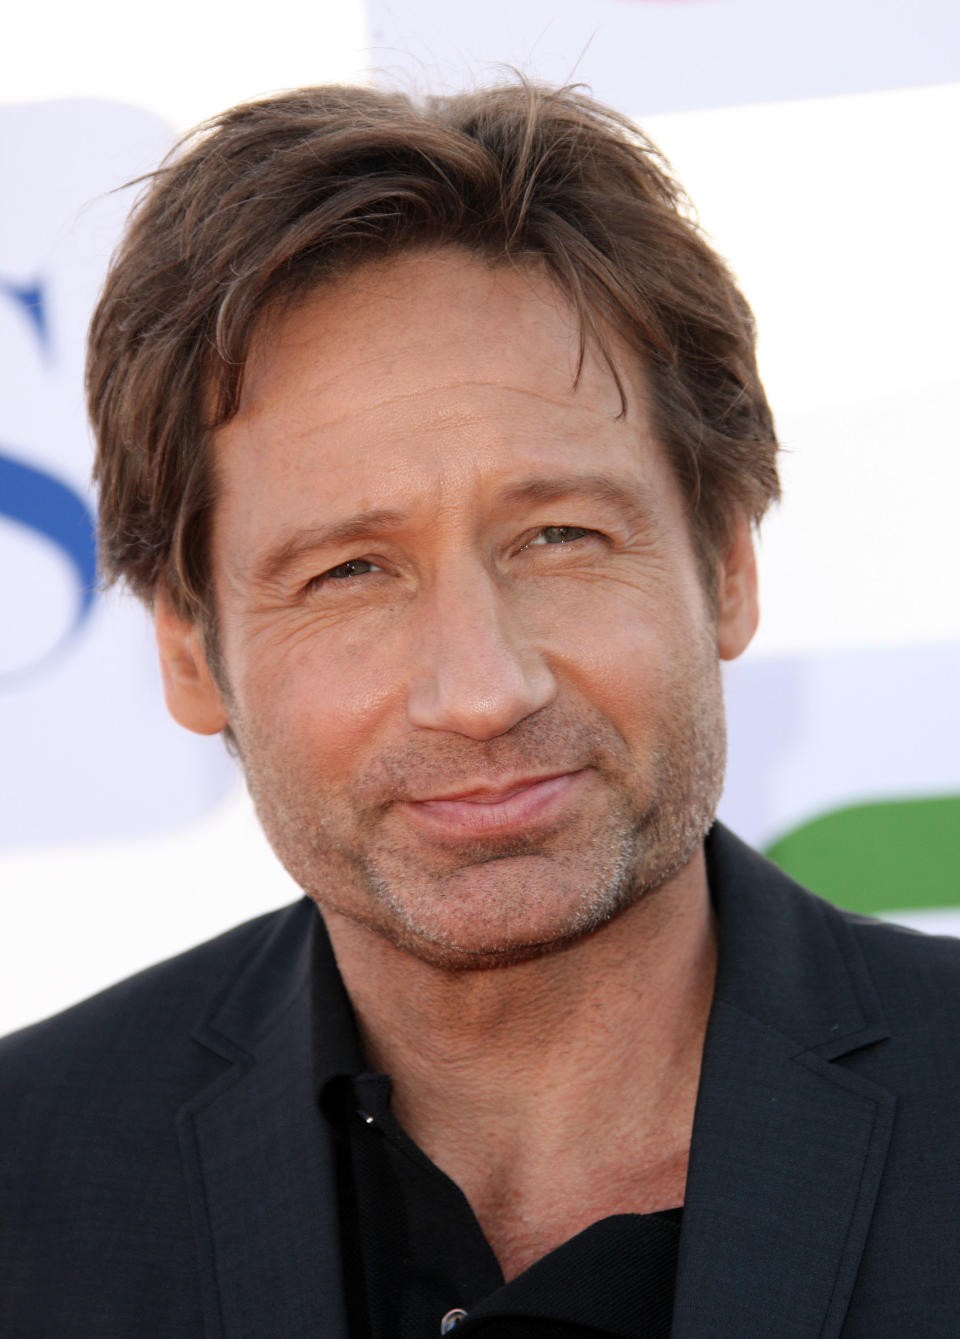 David Duchovny <a href="http://abcnews.go.com/Entertainment/story?id=5686632&page=1#.UHXcWBafGRk">plays a sex addict</a> on Showtime's "Californication," but he also happens to be one in real life.  In 2008, the actor <a href="http://www.huffingtonpost.com/2008/08/28/david-duchovny-in-rehab-f_n_122268.html">voluntarily checked himself</a> into a sex rehab program.  But Duchovny wasn't always able to admit he had a problem.  In an <a href="http://www.reuters.com/article/2008/08/29/us-duchovny-idUSN2835847820080829">interview with <em>Playgirl</em> in 1997</a>, he told the magazine: "I'm not a sex addict...I have never been to those meetings. It's hurtful to my family and if I was involved with a woman in a monogamous relationship, it would be hurtful to her."    Duchovny and wife Tea Leoni <a href="http://www.usmagazine.com/celebrity-news/news/tea-leoni-david-duchovny-what-went-wrong-2011296">separated</a> (for the <a href="http://www.foxnews.com/story/0,2933,438684,00.html">second time)</a> in June 2011, after 14 years of marriage.  Rumors that they <a href="http://www.huffingtonpost.com/2012/08/09/gillian-anderson-david-duvhovny-dating-xfiles-rumors_n_1759841.html">quietly divorced</a> surfaced in 2012, though it has yet to be confirmed.   